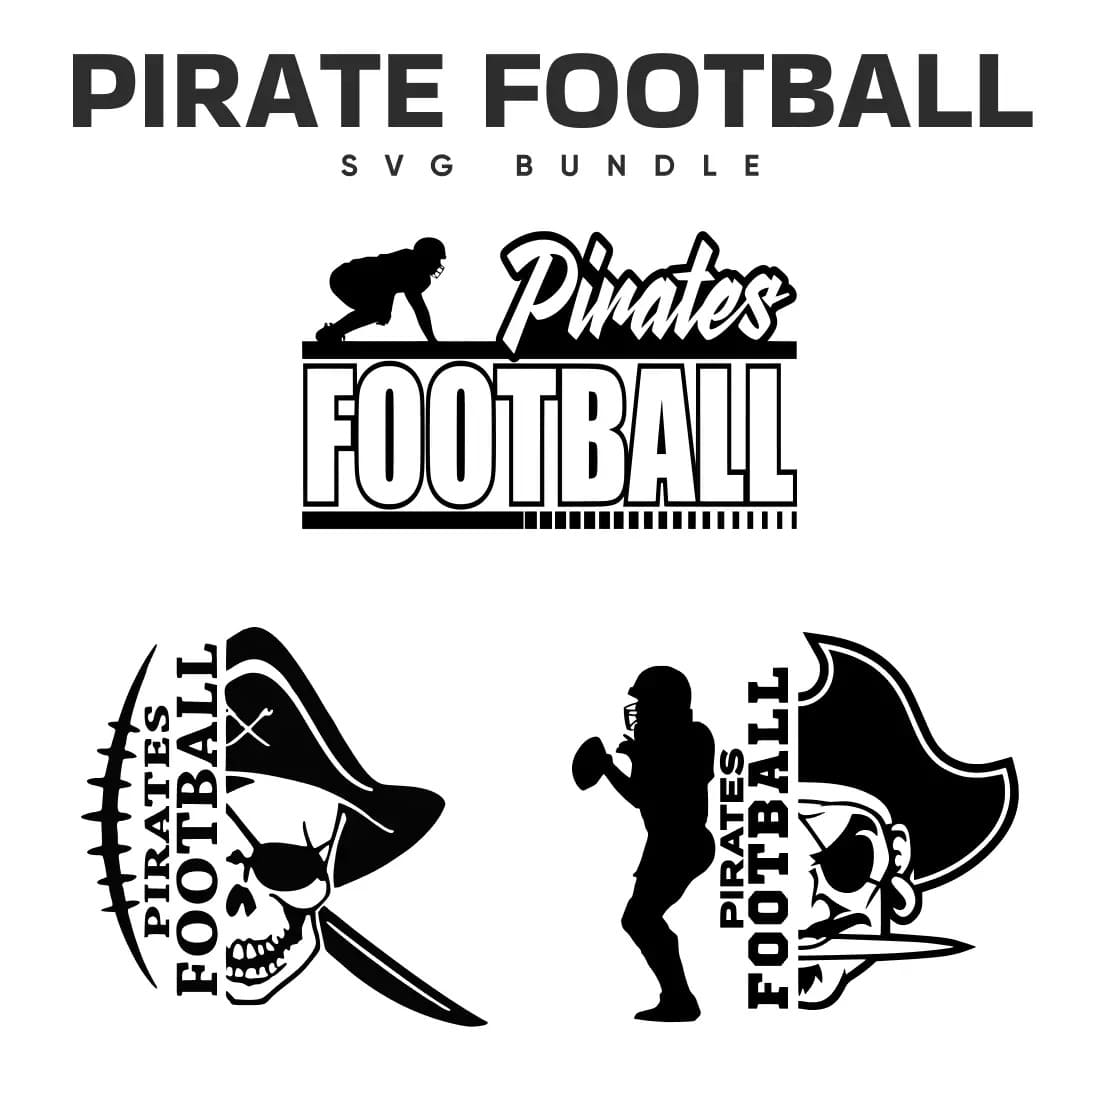 Pirate Football SVG Bundle Preview image.